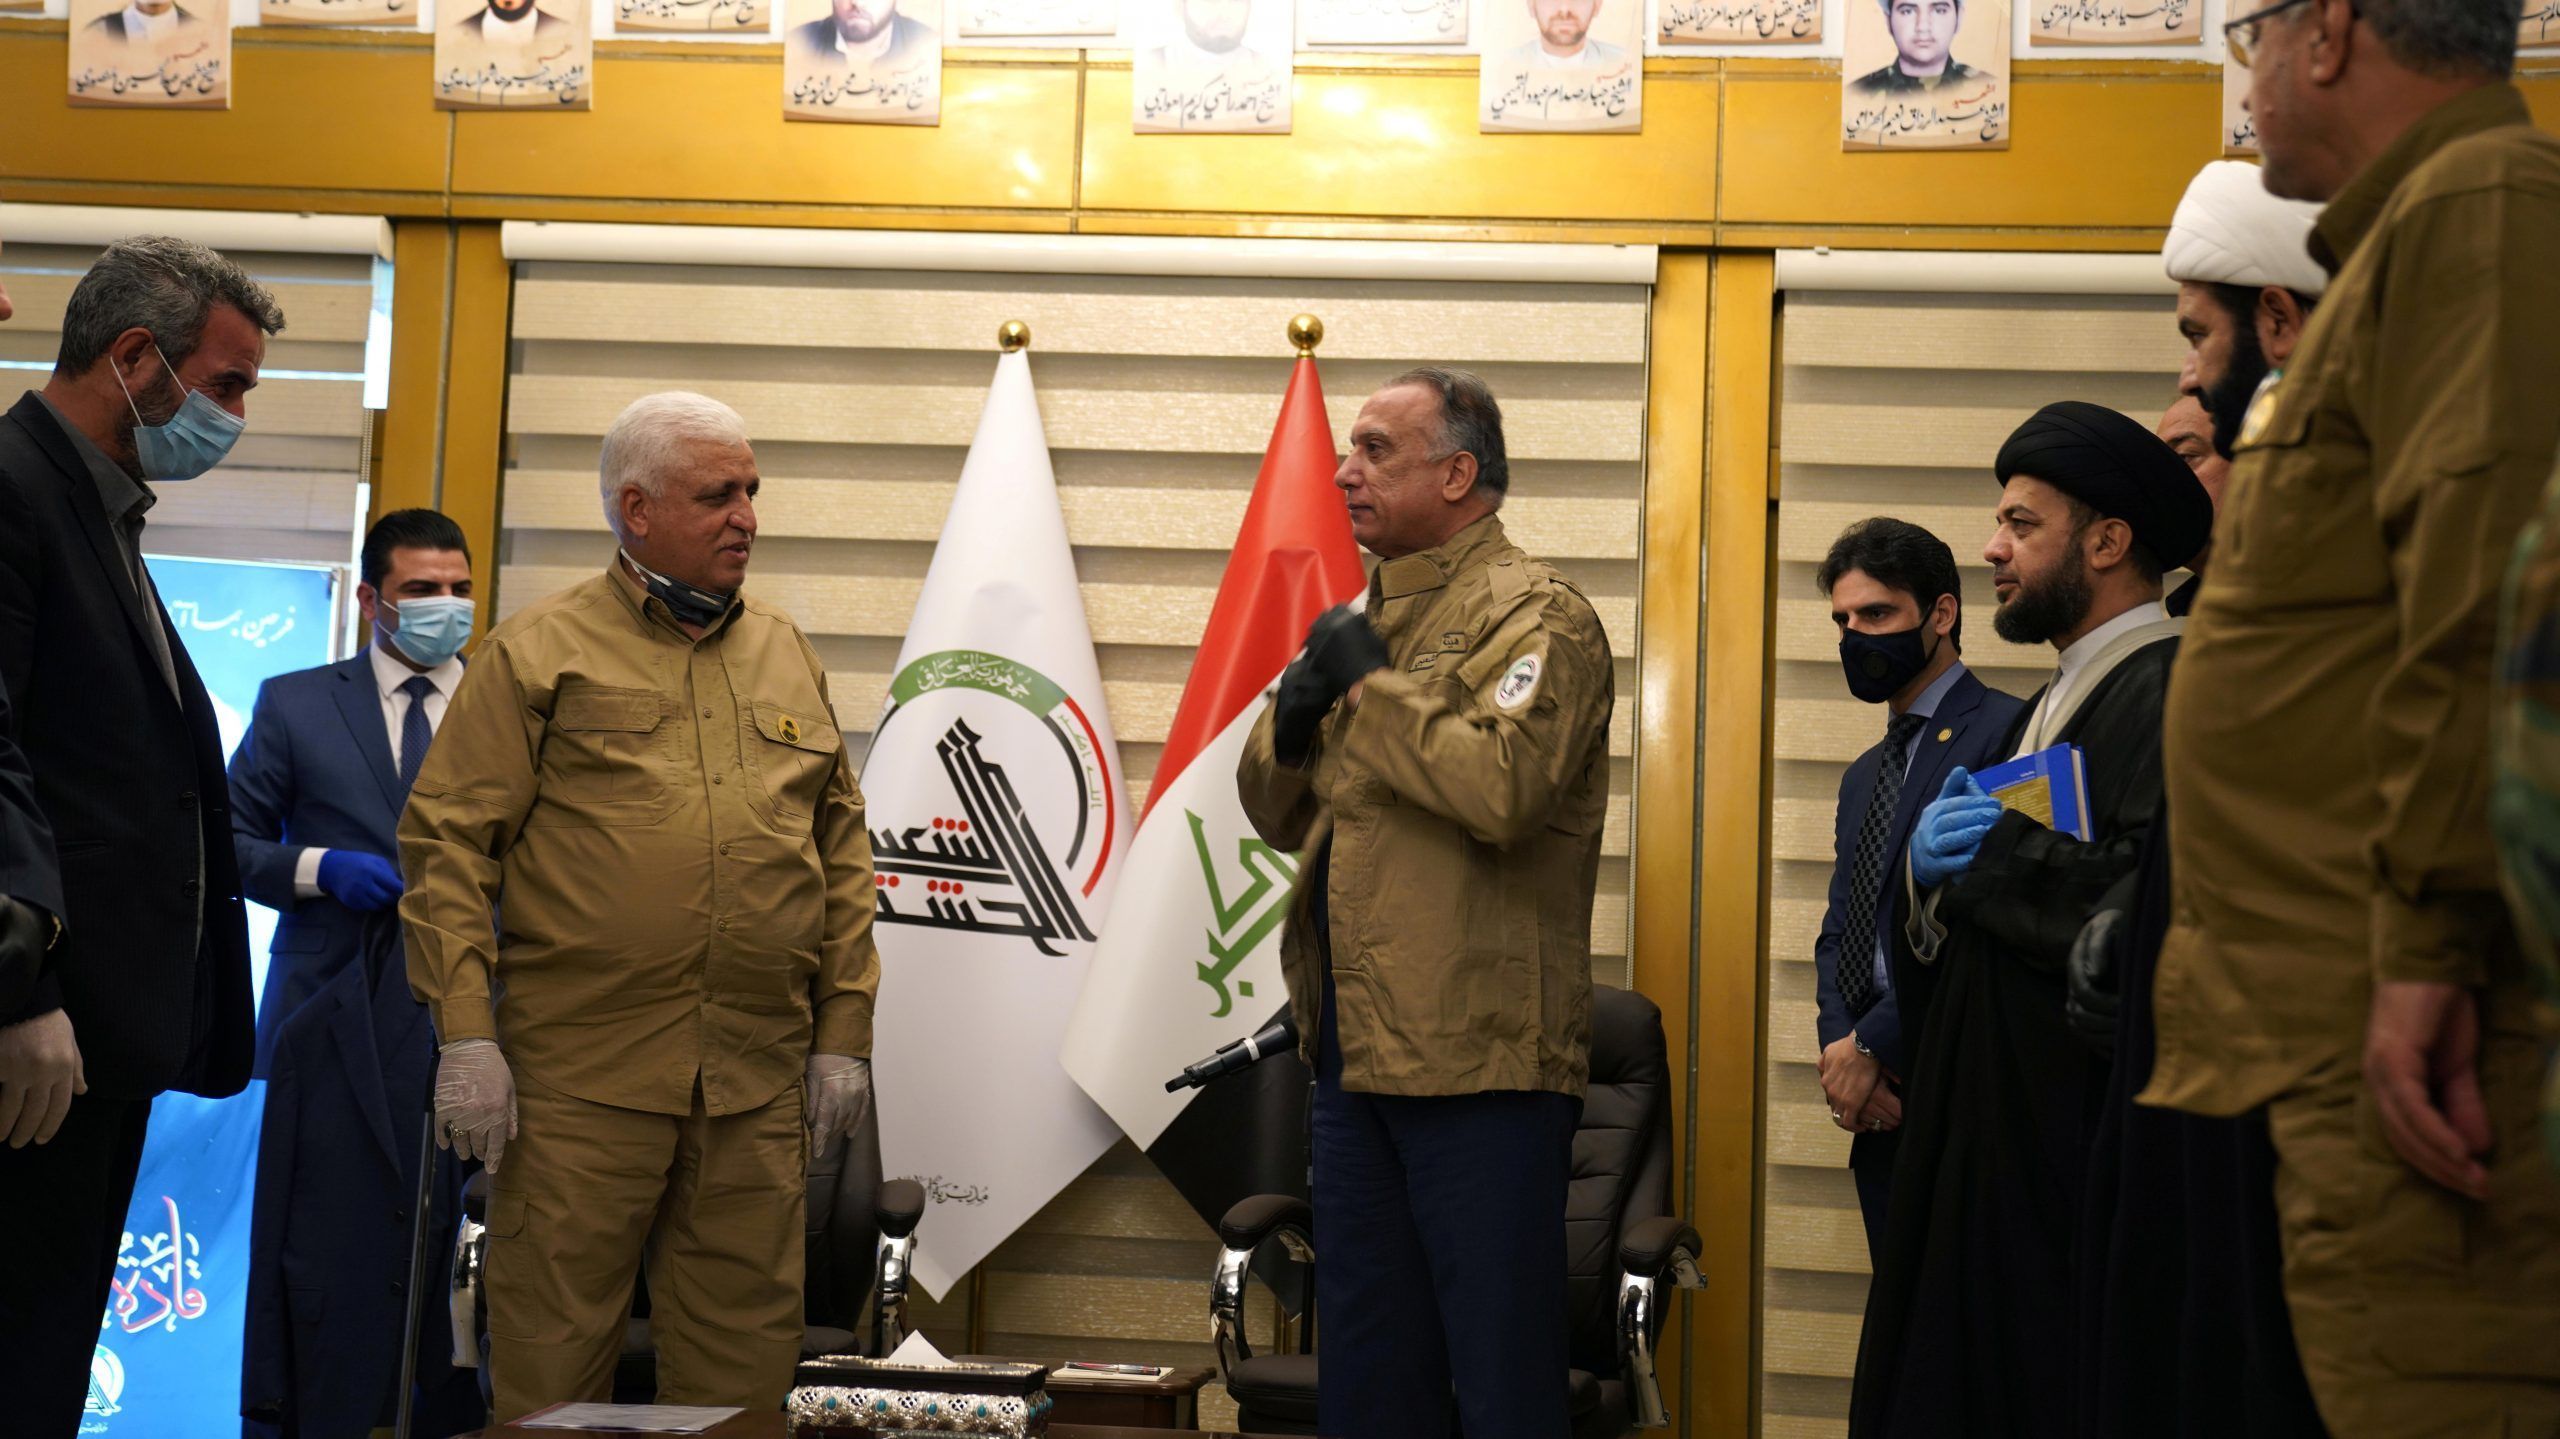 Iraqi Prime Minister al-Kazemi wears a military uniform of Popular Mobilization forces during his meeting with Head of the Popular Mobilization forces Faleh al-Fayyad in Baghdad, Iraq May 16, 2020. REUTERS./